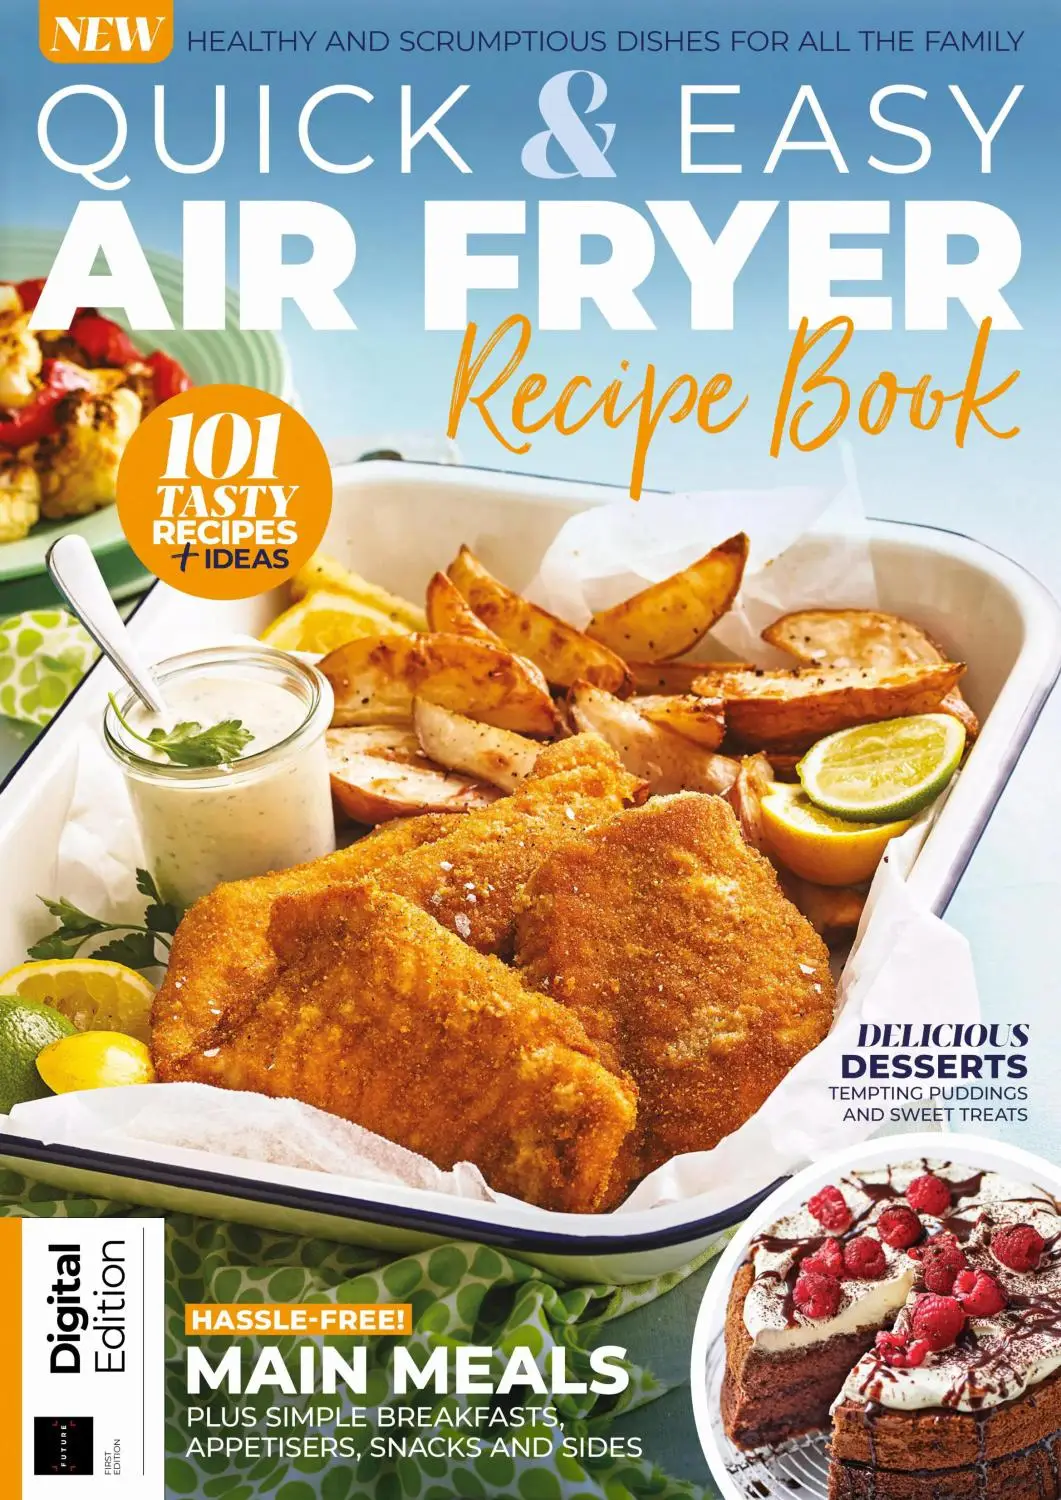 Snag Cathy's Cookbook with 150+ Yummy Air Fryer Recipes - Great